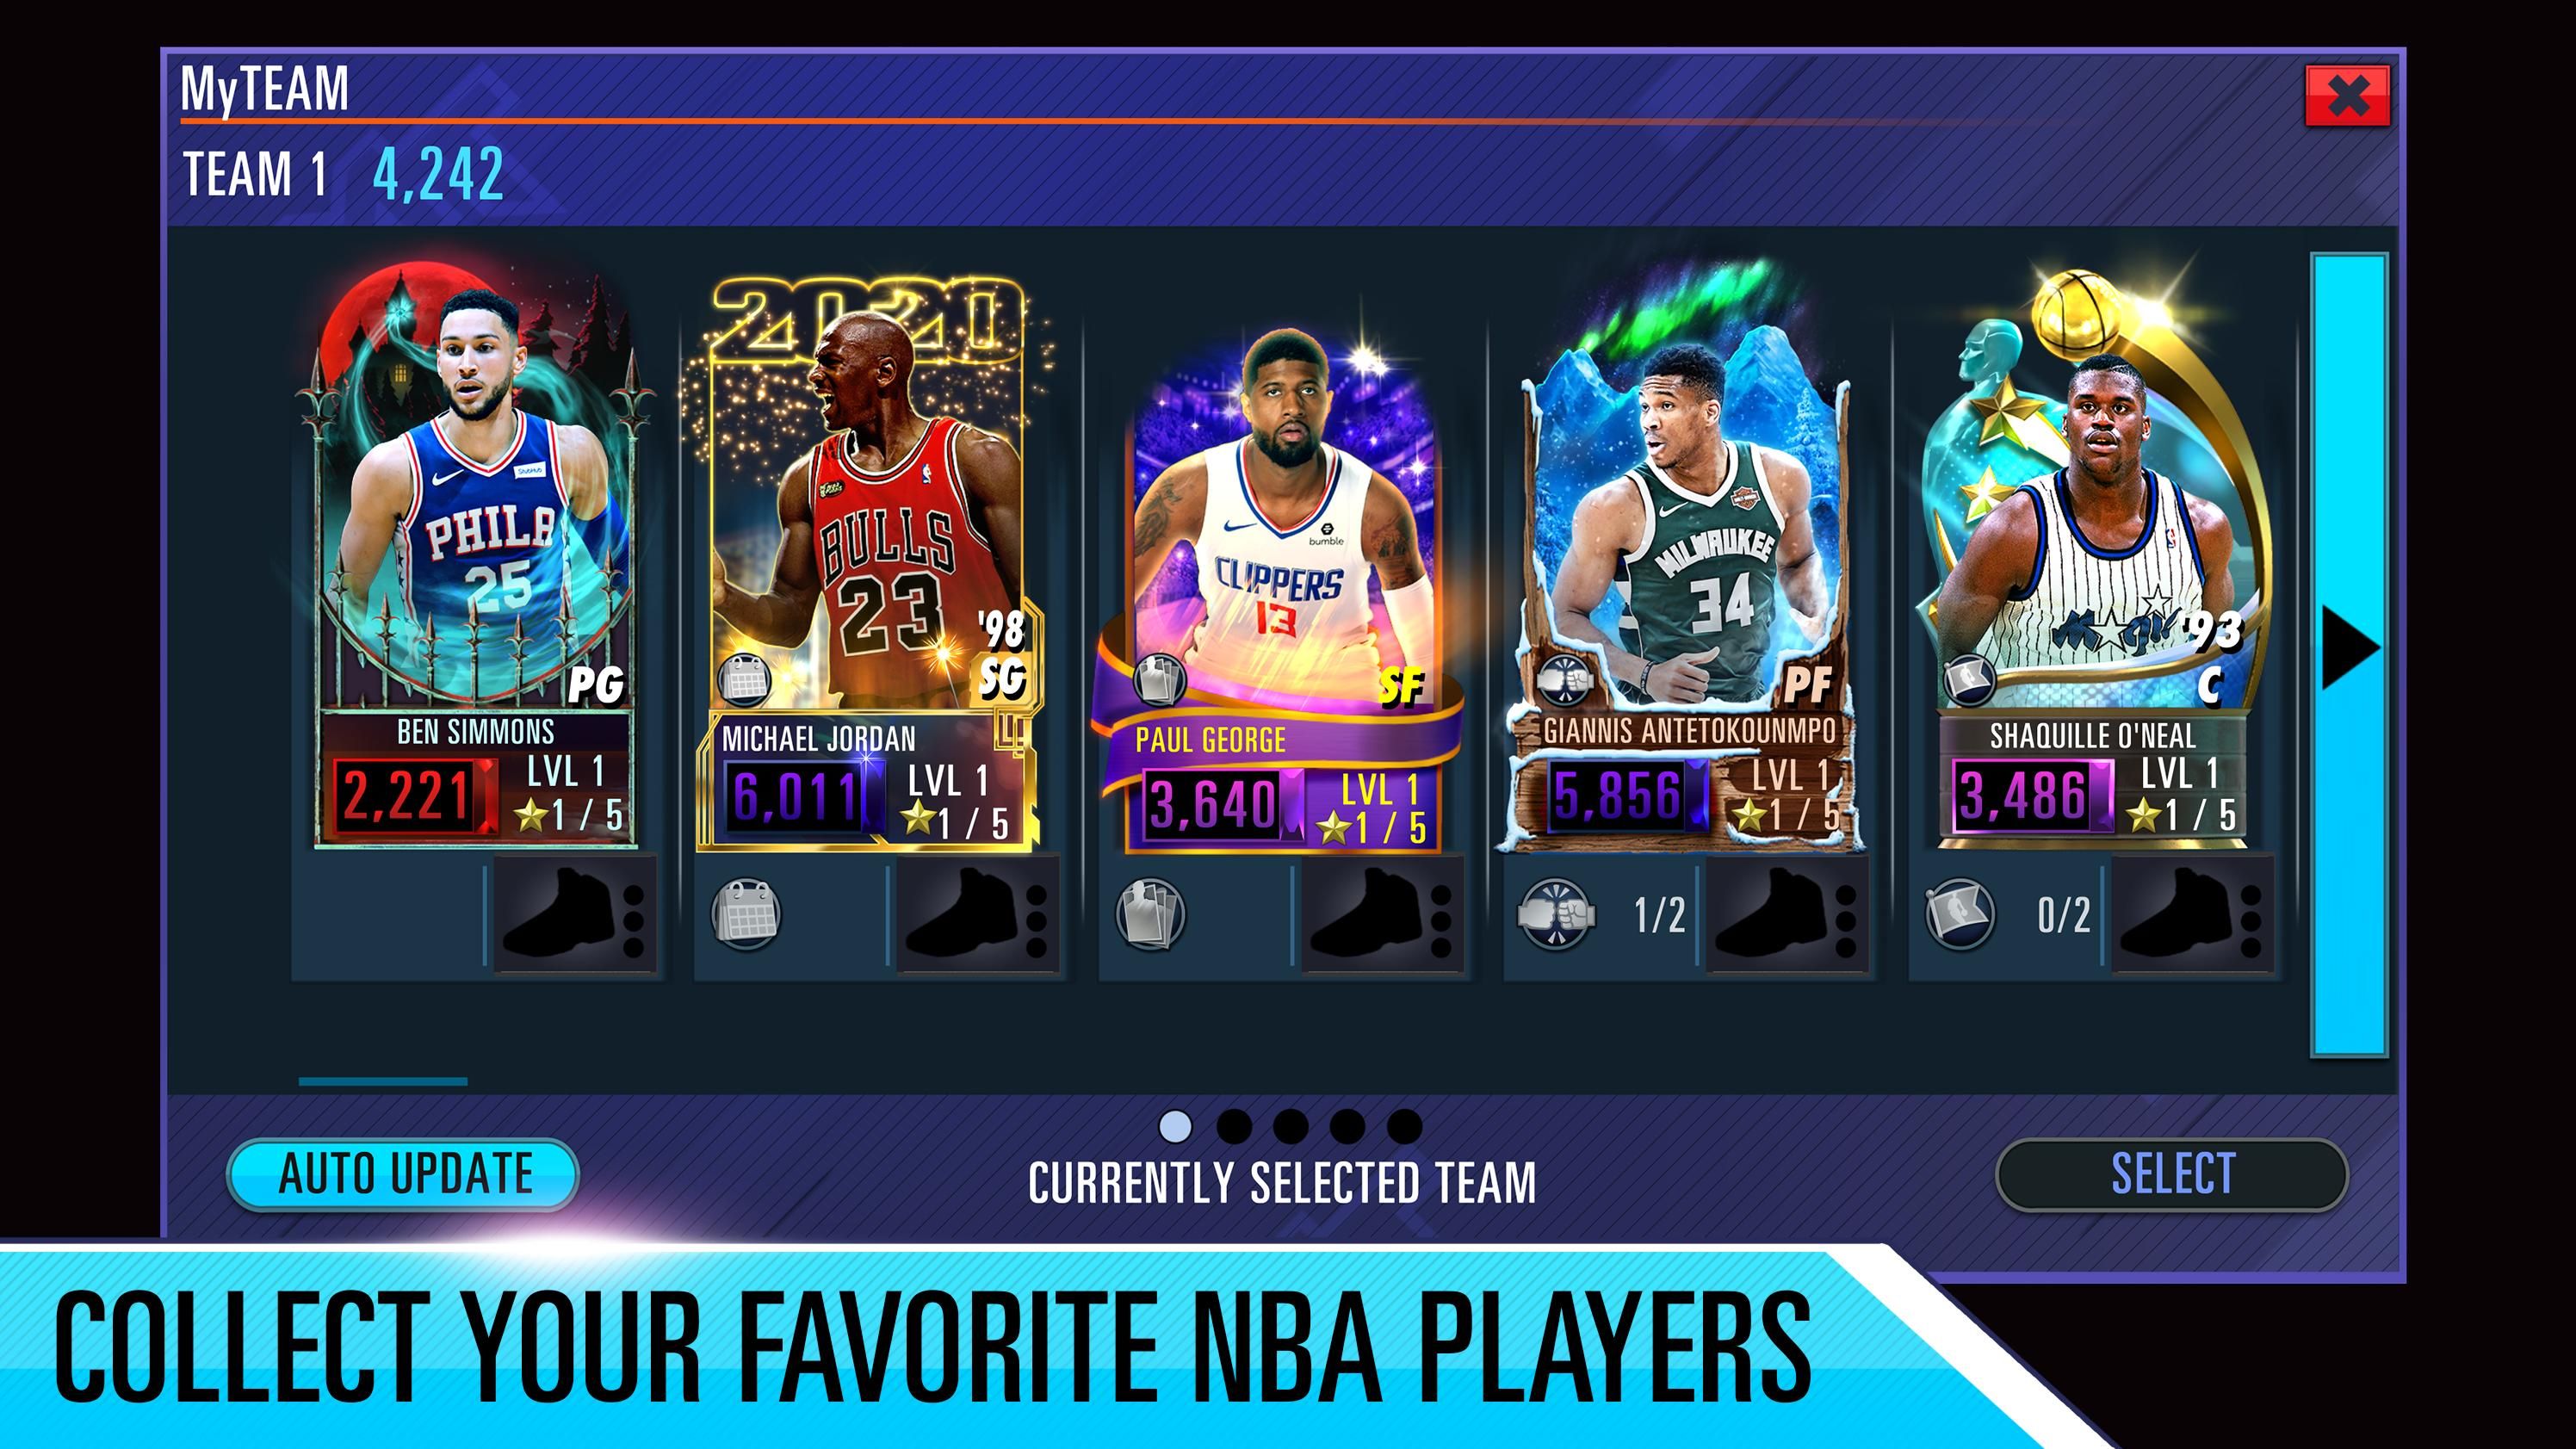 MyTeam Mobile app helps earn VC on the console version